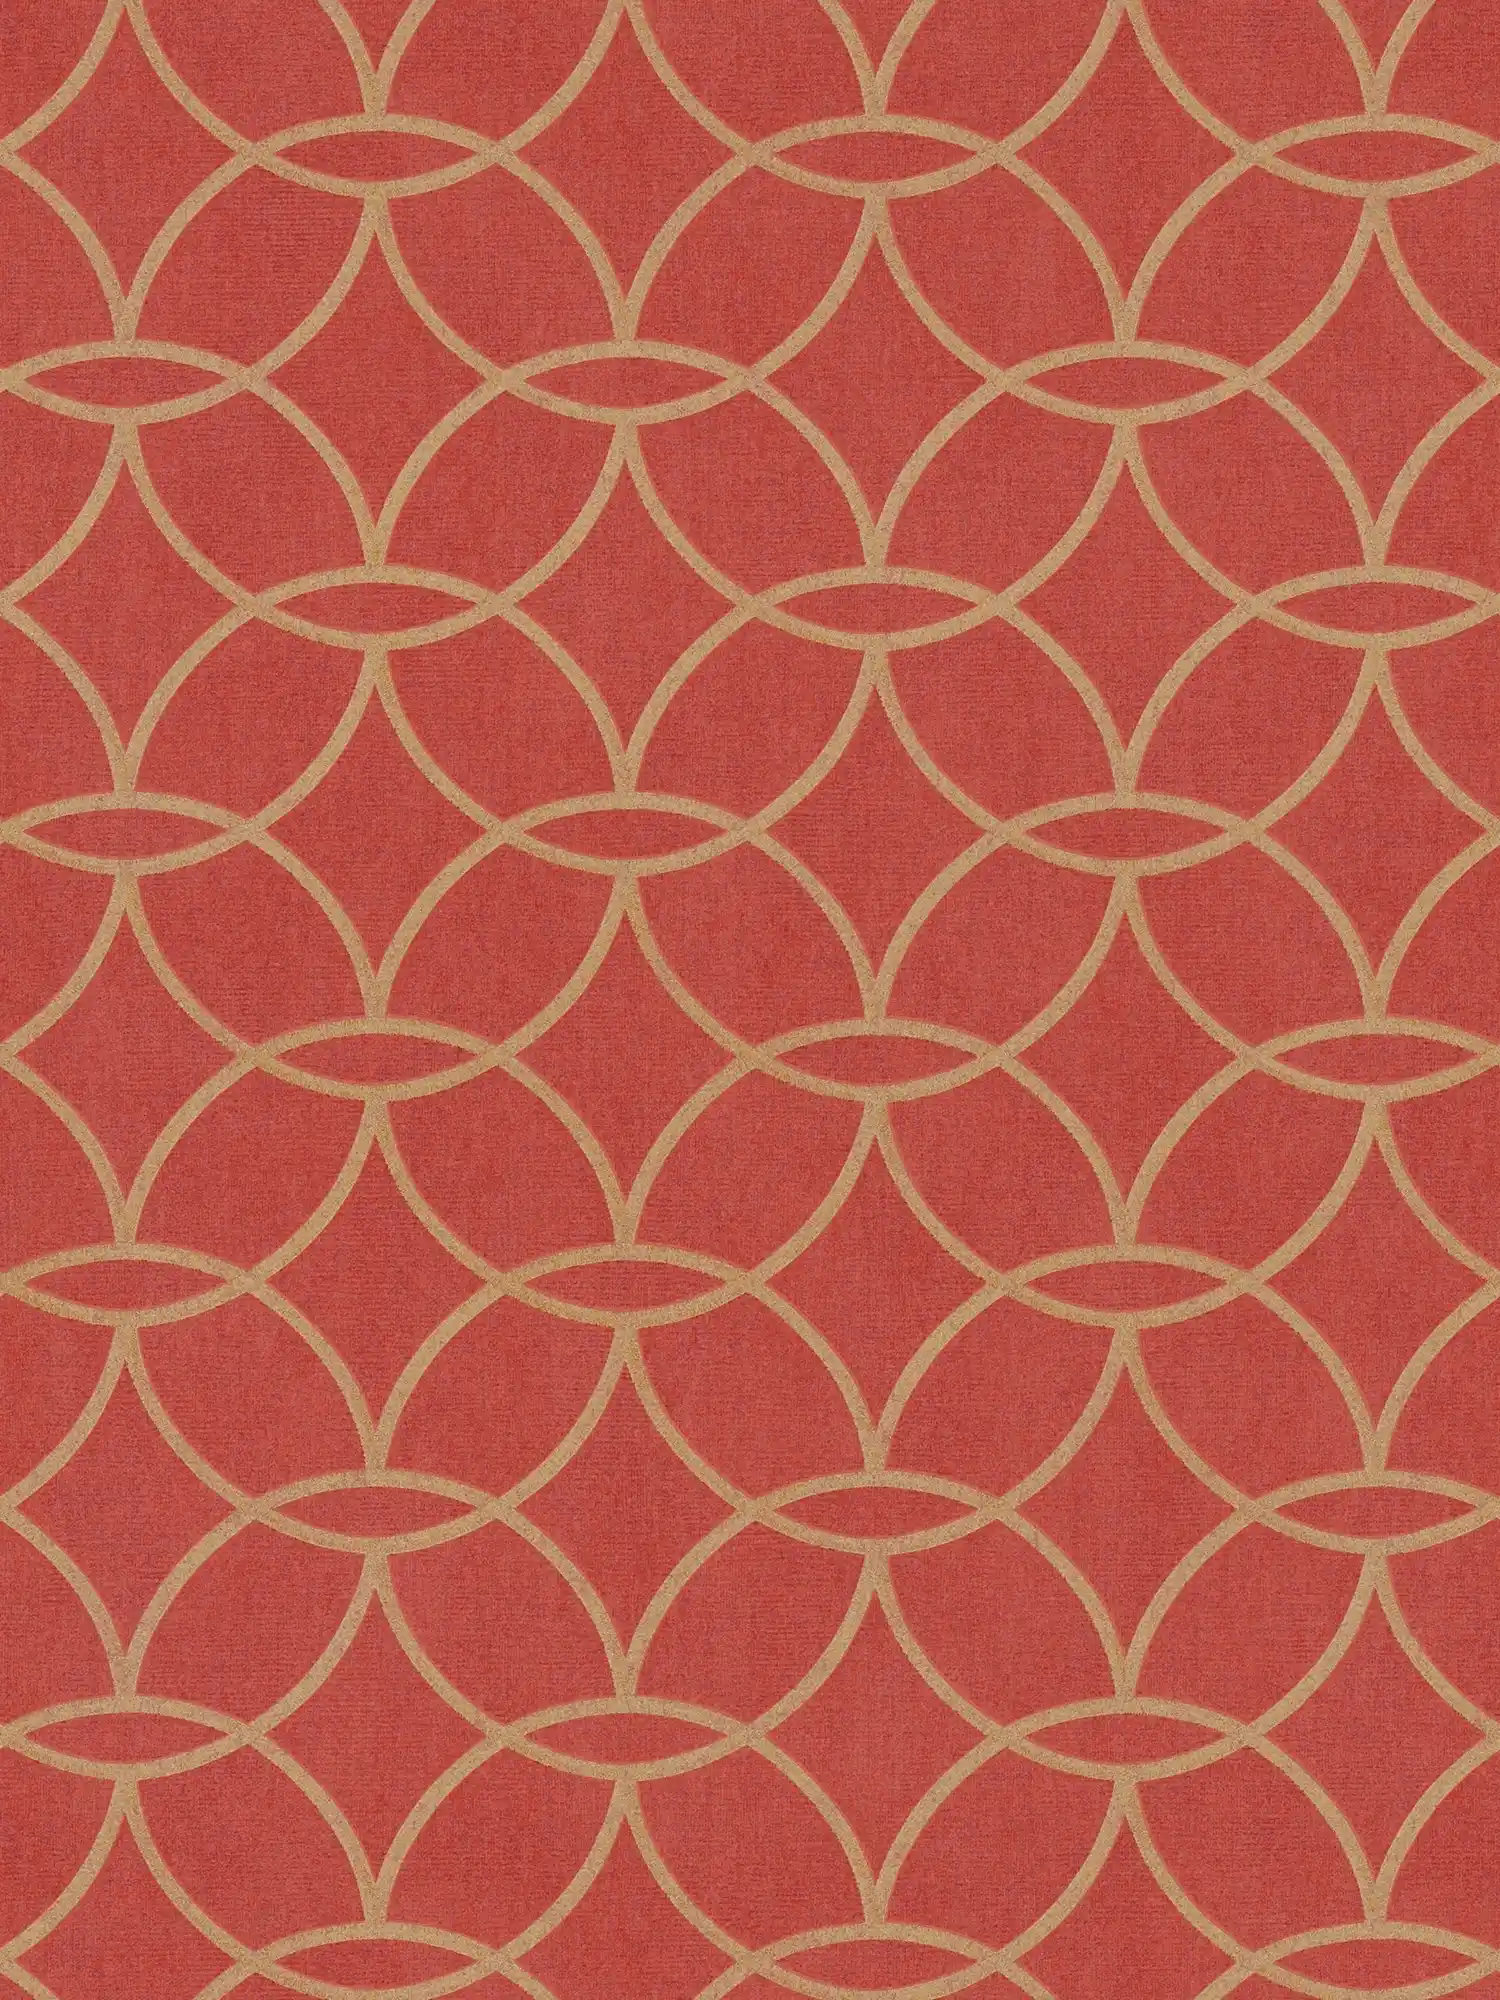 Non-woven wallpaper geometric gold pattern & shimmer effect - red, gold
